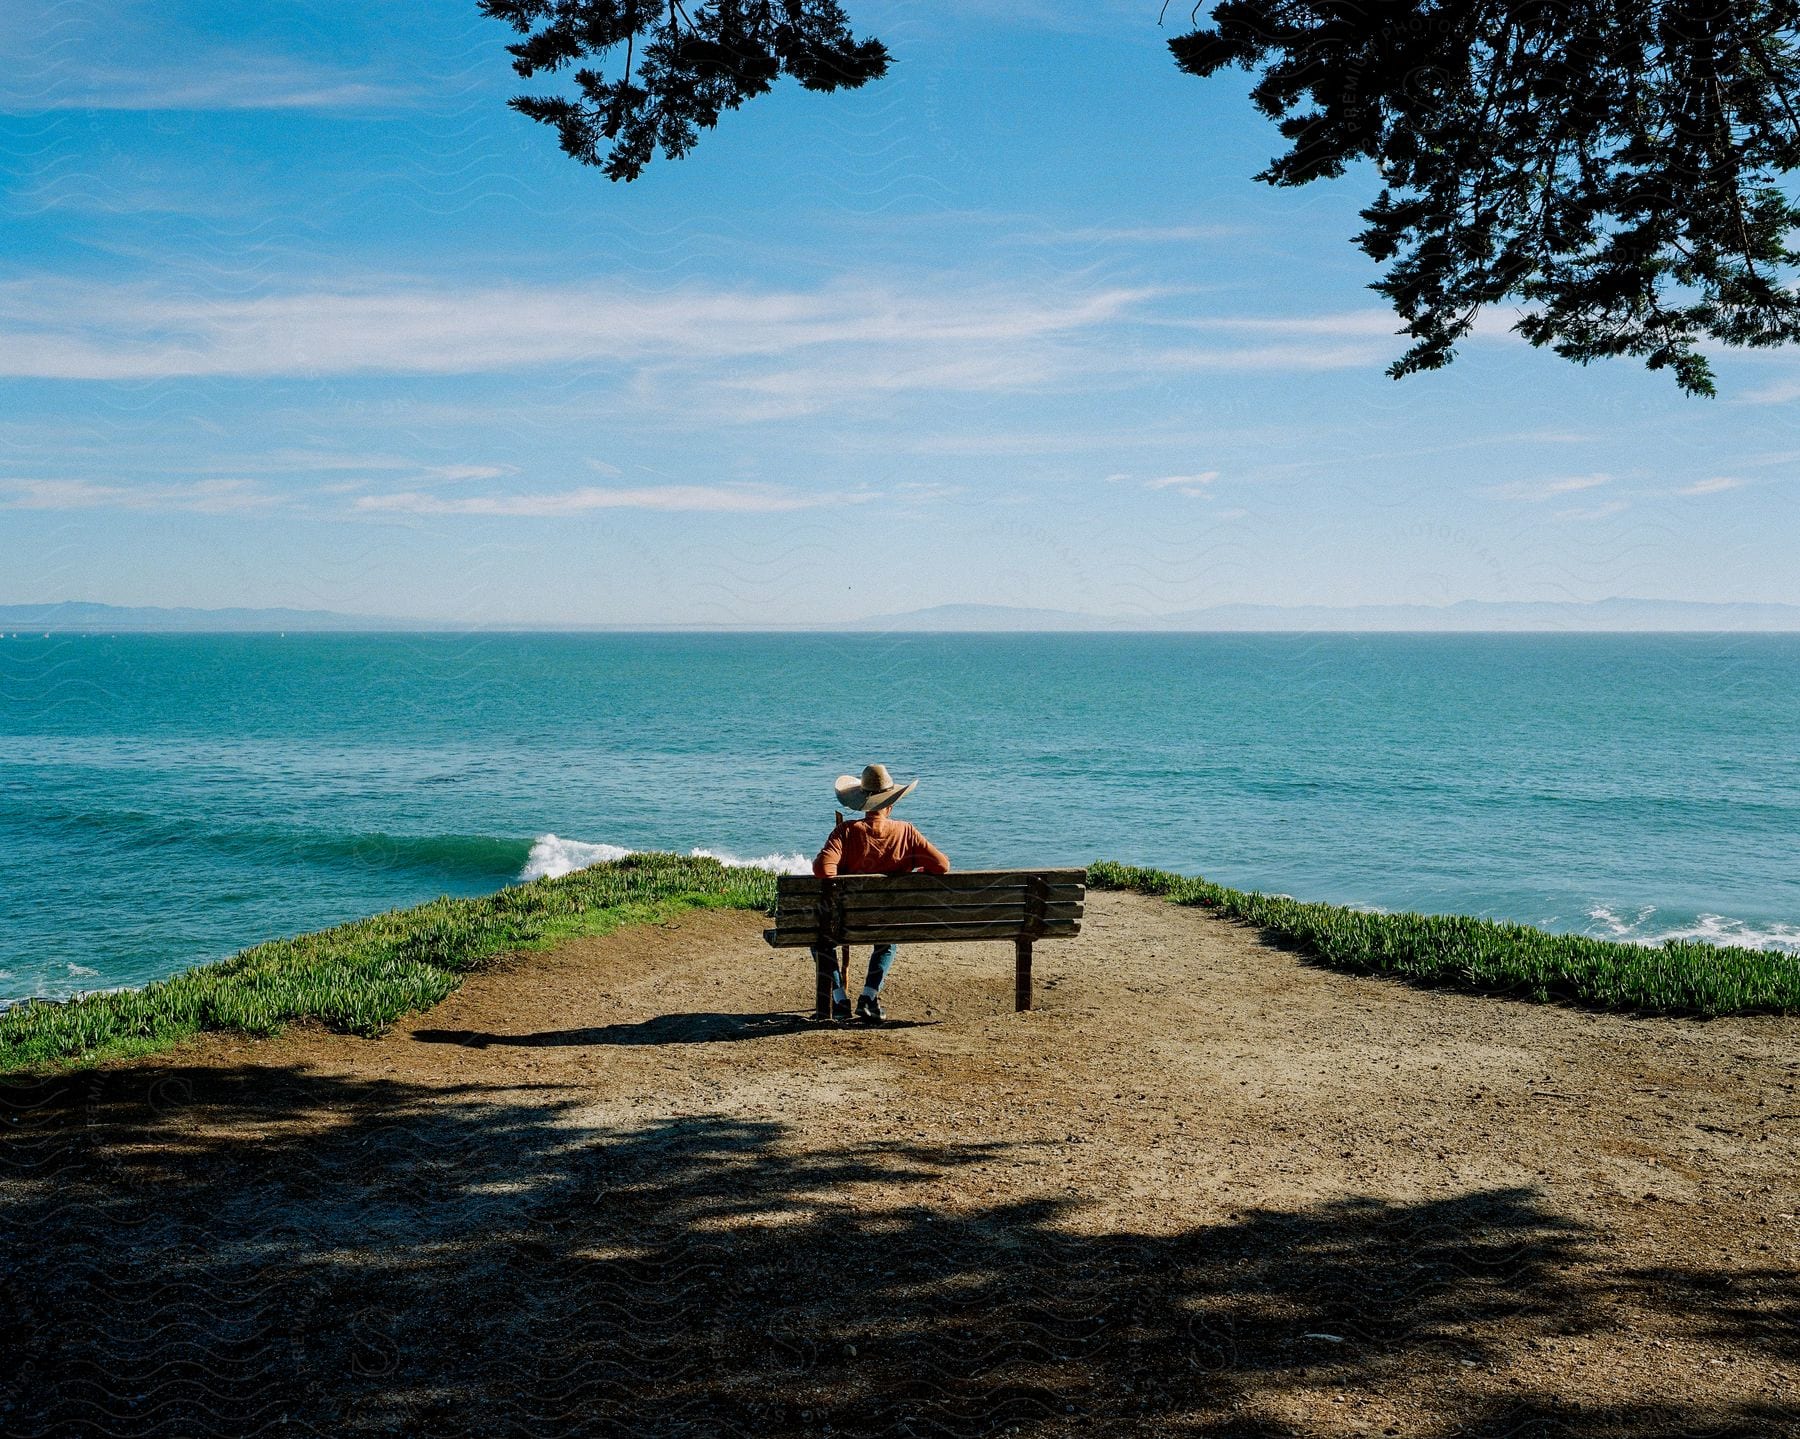 A person in jeans and a hat sits on a bench overlooking an ocean on a cloudy day